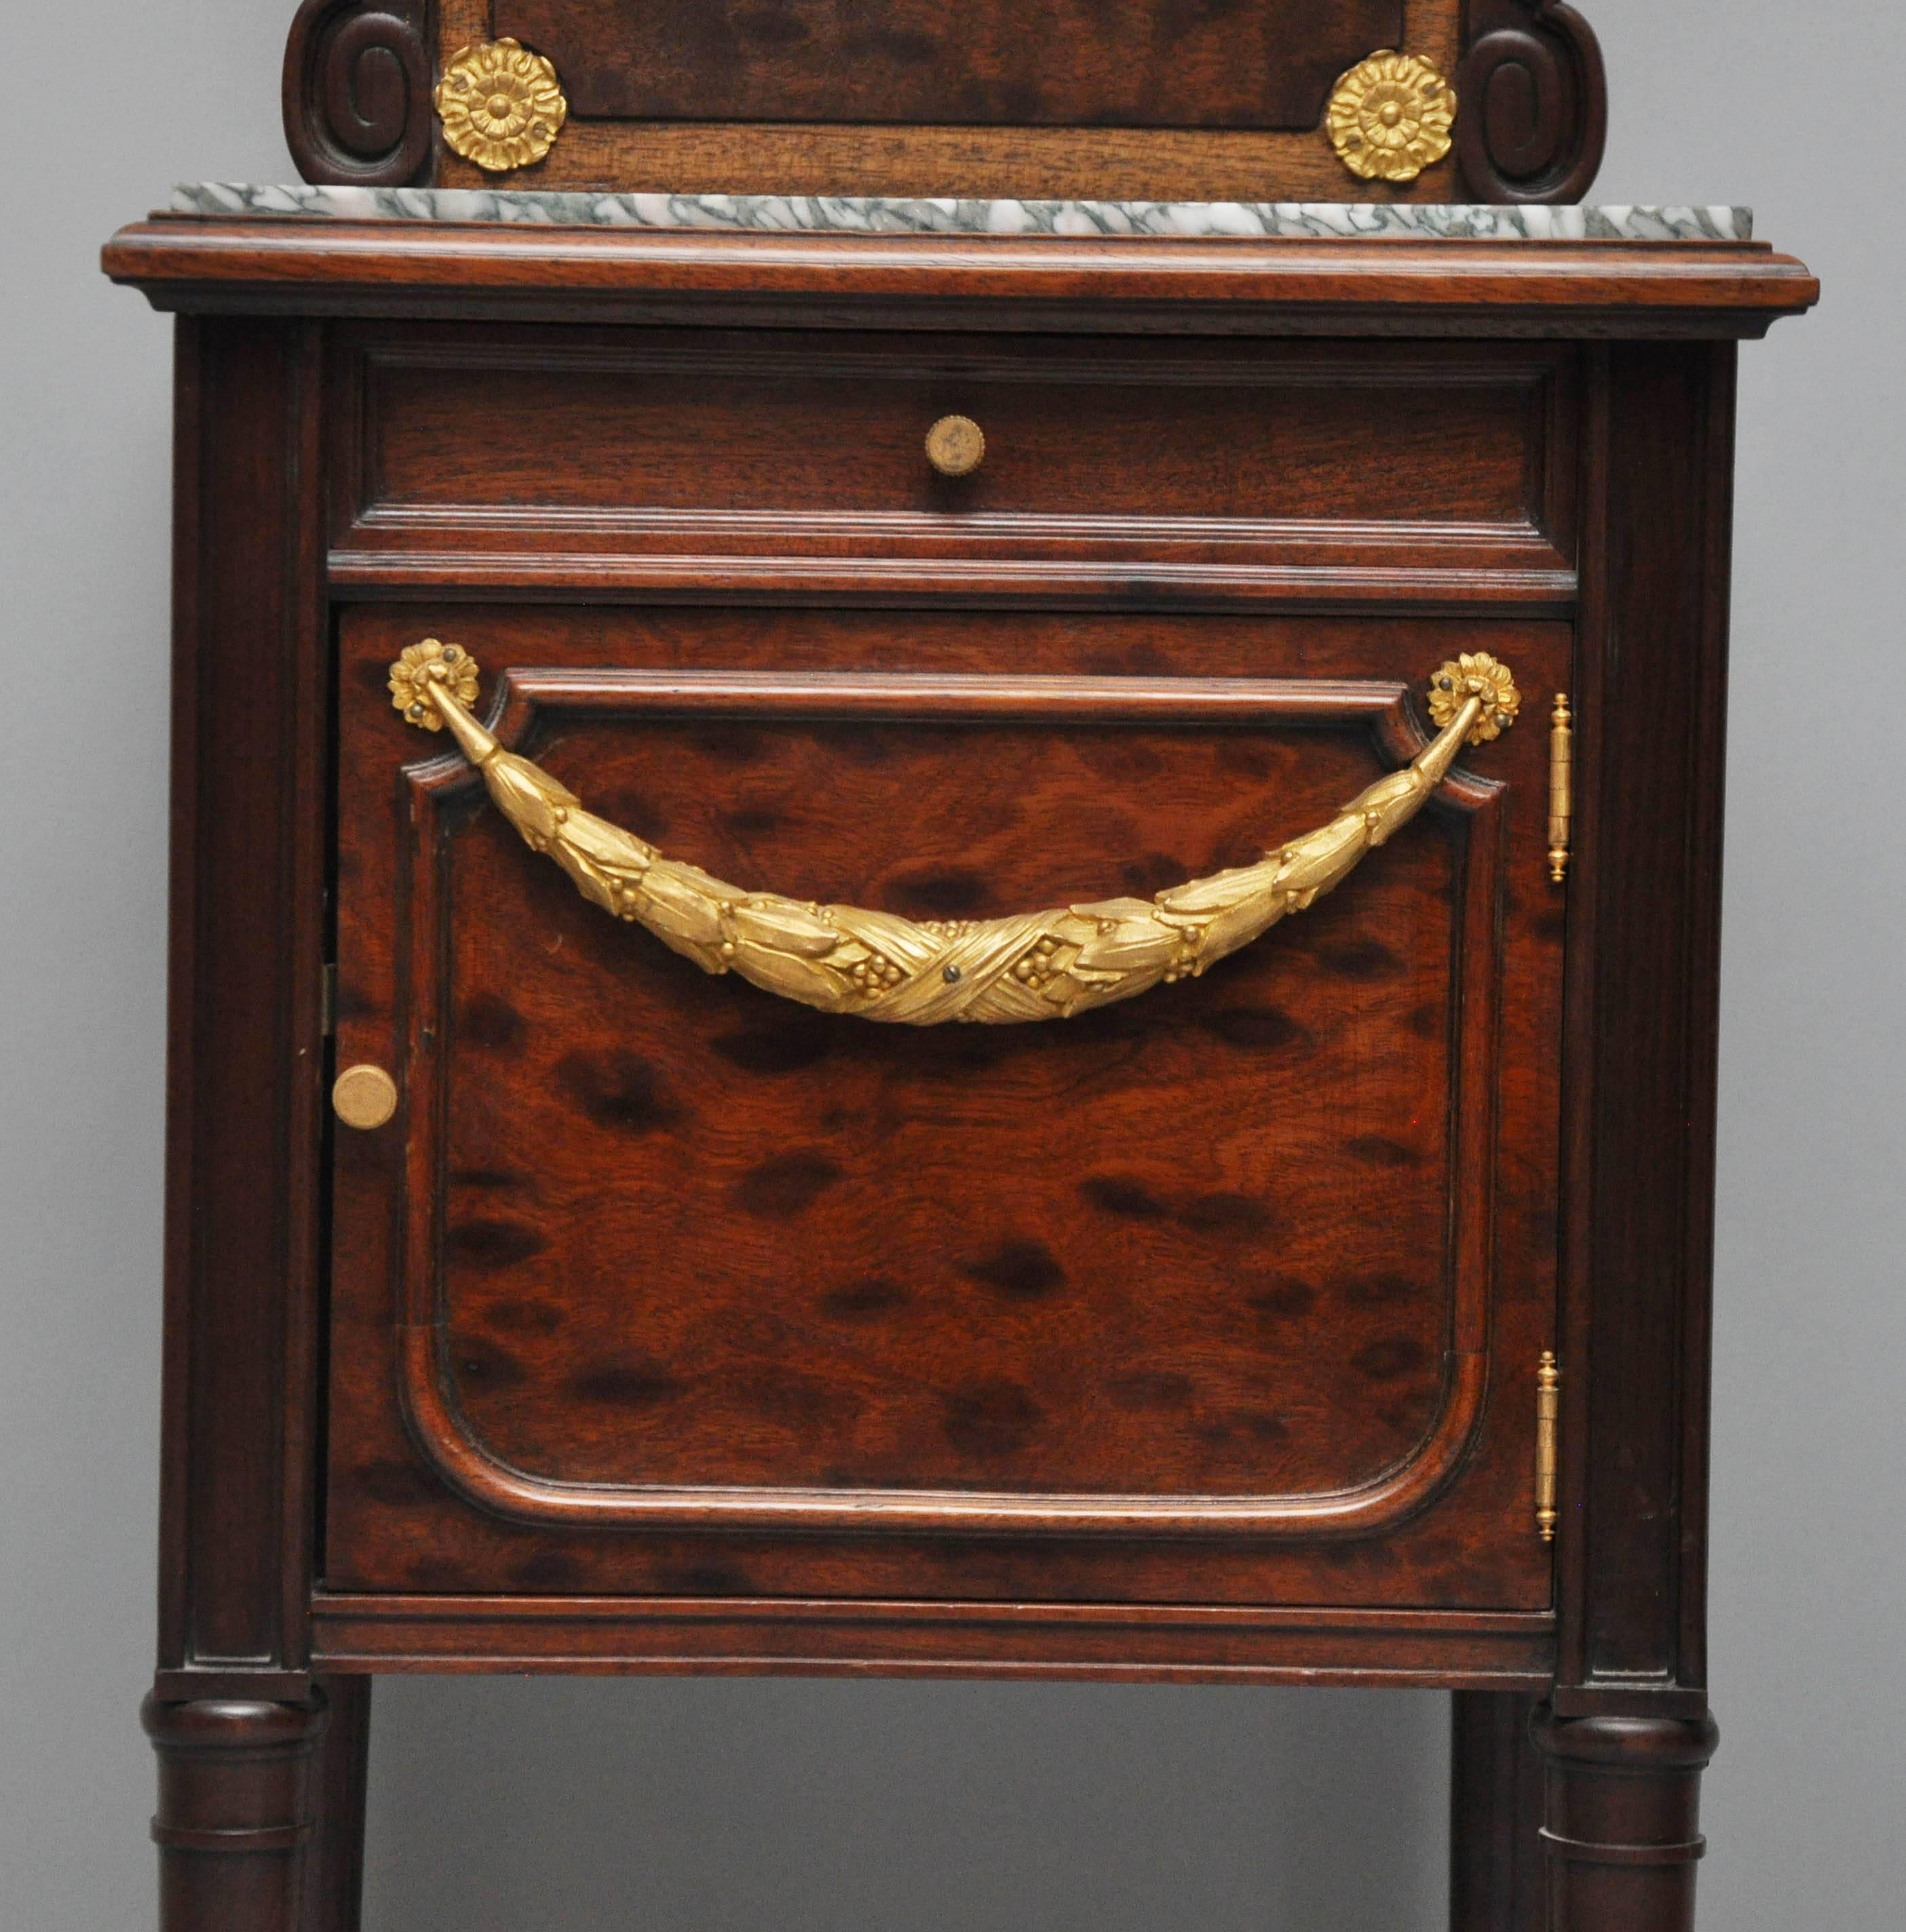 French burl mahogany bedside table, square marble top surface above frieze drawer and paneled cabinet with gilt mercury bronze draped garland revealing original porcelain interior originally used for chamber pot, supported on four circular tapered